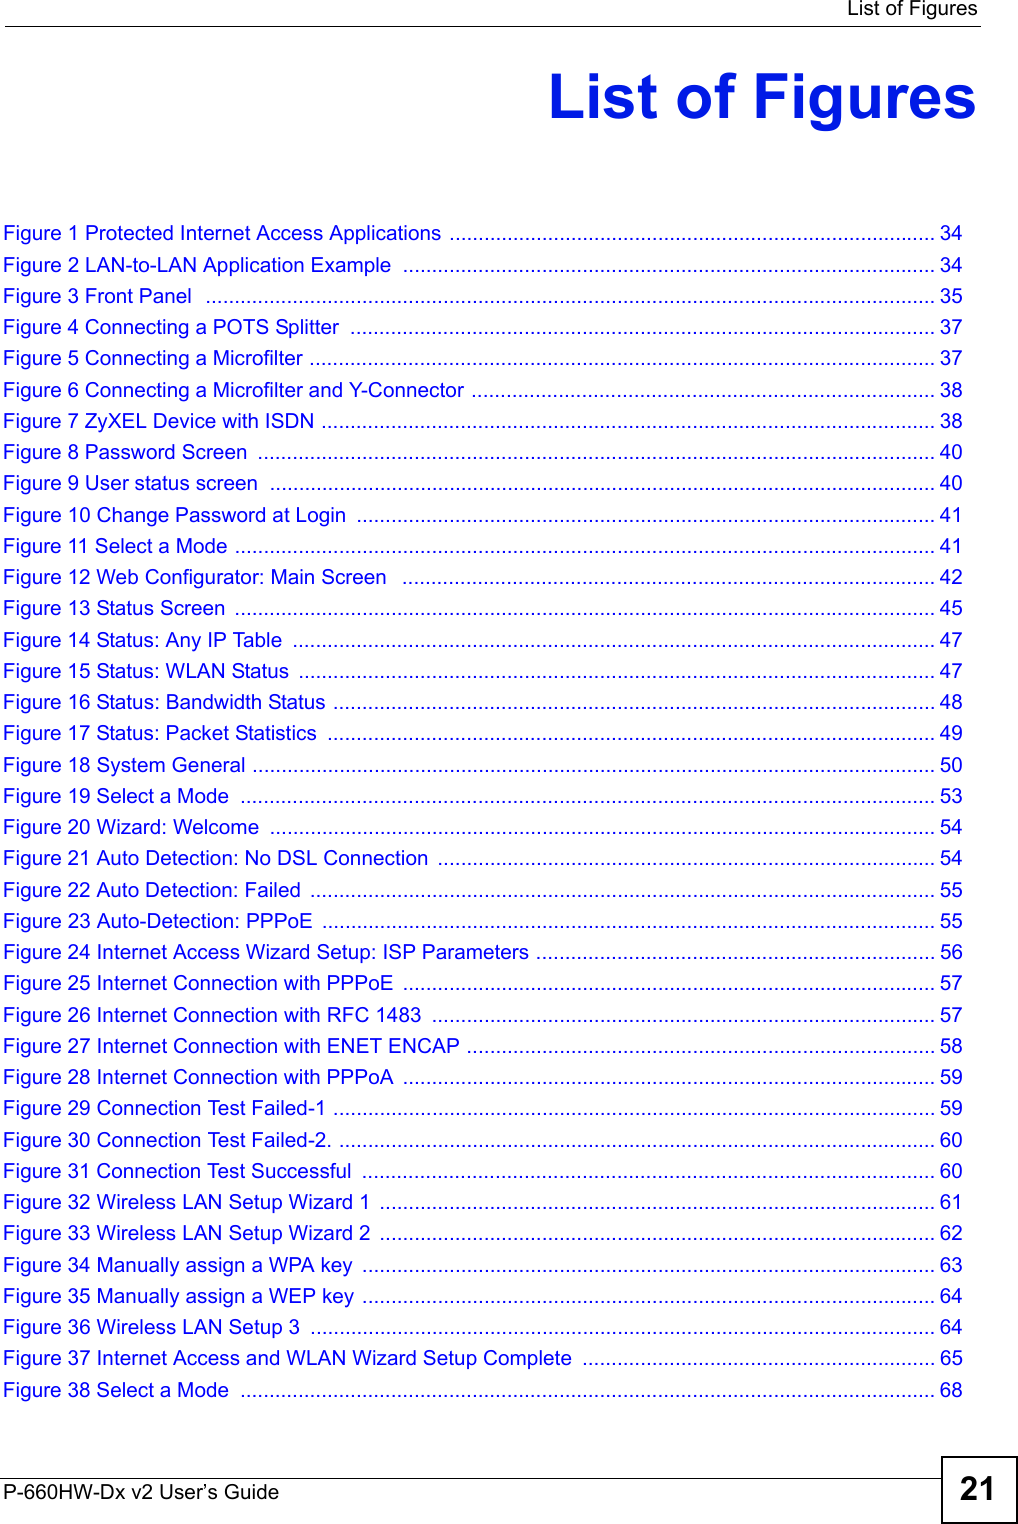  List of FiguresP-660HW-Dx v2 User’s Guide 21List of FiguresFigure 1 Protected Internet Access Applications .................................................................................... 34Figure 2 LAN-to-LAN Application Example ............................................................................................ 34Figure 3 Front Panel  .............................................................................................................................. 35Figure 4 Connecting a POTS Splitter  ..................................................................................................... 37Figure 5 Connecting a Microfilter ............................................................................................................ 37Figure 6 Connecting a Microfilter and Y-Connector ................................................................................ 38Figure 7 ZyXEL Device with ISDN .......................................................................................................... 38Figure 8 Password Screen  ..................................................................................................................... 40Figure 9 User status screen  ................................................................................................................... 40Figure 10 Change Password at Login .................................................................................................... 41Figure 11 Select a Mode ......................................................................................................................... 41Figure 12 Web Configurator: Main Screen   ............................................................................................ 42Figure 13 Status Screen  ......................................................................................................................... 45Figure 14 Status: Any IP Table  ............................................................................................................... 47Figure 15 Status: WLAN Status  .............................................................................................................. 47Figure 16 Status: Bandwidth Status ........................................................................................................ 48Figure 17 Status: Packet Statistics  ......................................................................................................... 49Figure 18 System General ...................................................................................................................... 50Figure 19 Select a Mode  ........................................................................................................................ 53Figure 20 Wizard: Welcome  ................................................................................................................... 54Figure 21 Auto Detection: No DSL Connection  ...................................................................................... 54Figure 22 Auto Detection: Failed  ............................................................................................................ 55Figure 23 Auto-Detection: PPPoE  .......................................................................................................... 55Figure 24 Internet Access Wizard Setup: ISP Parameters ..................................................................... 56Figure 25 Internet Connection with PPPoE  ............................................................................................ 57Figure 26 Internet Connection with RFC 1483  ....................................................................................... 57Figure 27 Internet Connection with ENET ENCAP ................................................................................. 58Figure 28 Internet Connection with PPPoA  ............................................................................................ 59Figure 29 Connection Test Failed-1 ........................................................................................................ 59Figure 30 Connection Test Failed-2. ....................................................................................................... 60Figure 31 Connection Test Successful  ................................................................................................... 60Figure 32 Wireless LAN Setup Wizard 1  ................................................................................................ 61Figure 33 Wireless LAN Setup Wizard 2  ................................................................................................ 62Figure 34 Manually assign a WPA key  ................................................................................................... 63Figure 35 Manually assign a WEP key ................................................................................................... 64Figure 36 Wireless LAN Setup 3  ............................................................................................................ 64Figure 37 Internet Access and WLAN Wizard Setup Complete  ............................................................. 65Figure 38 Select a Mode  ........................................................................................................................ 68